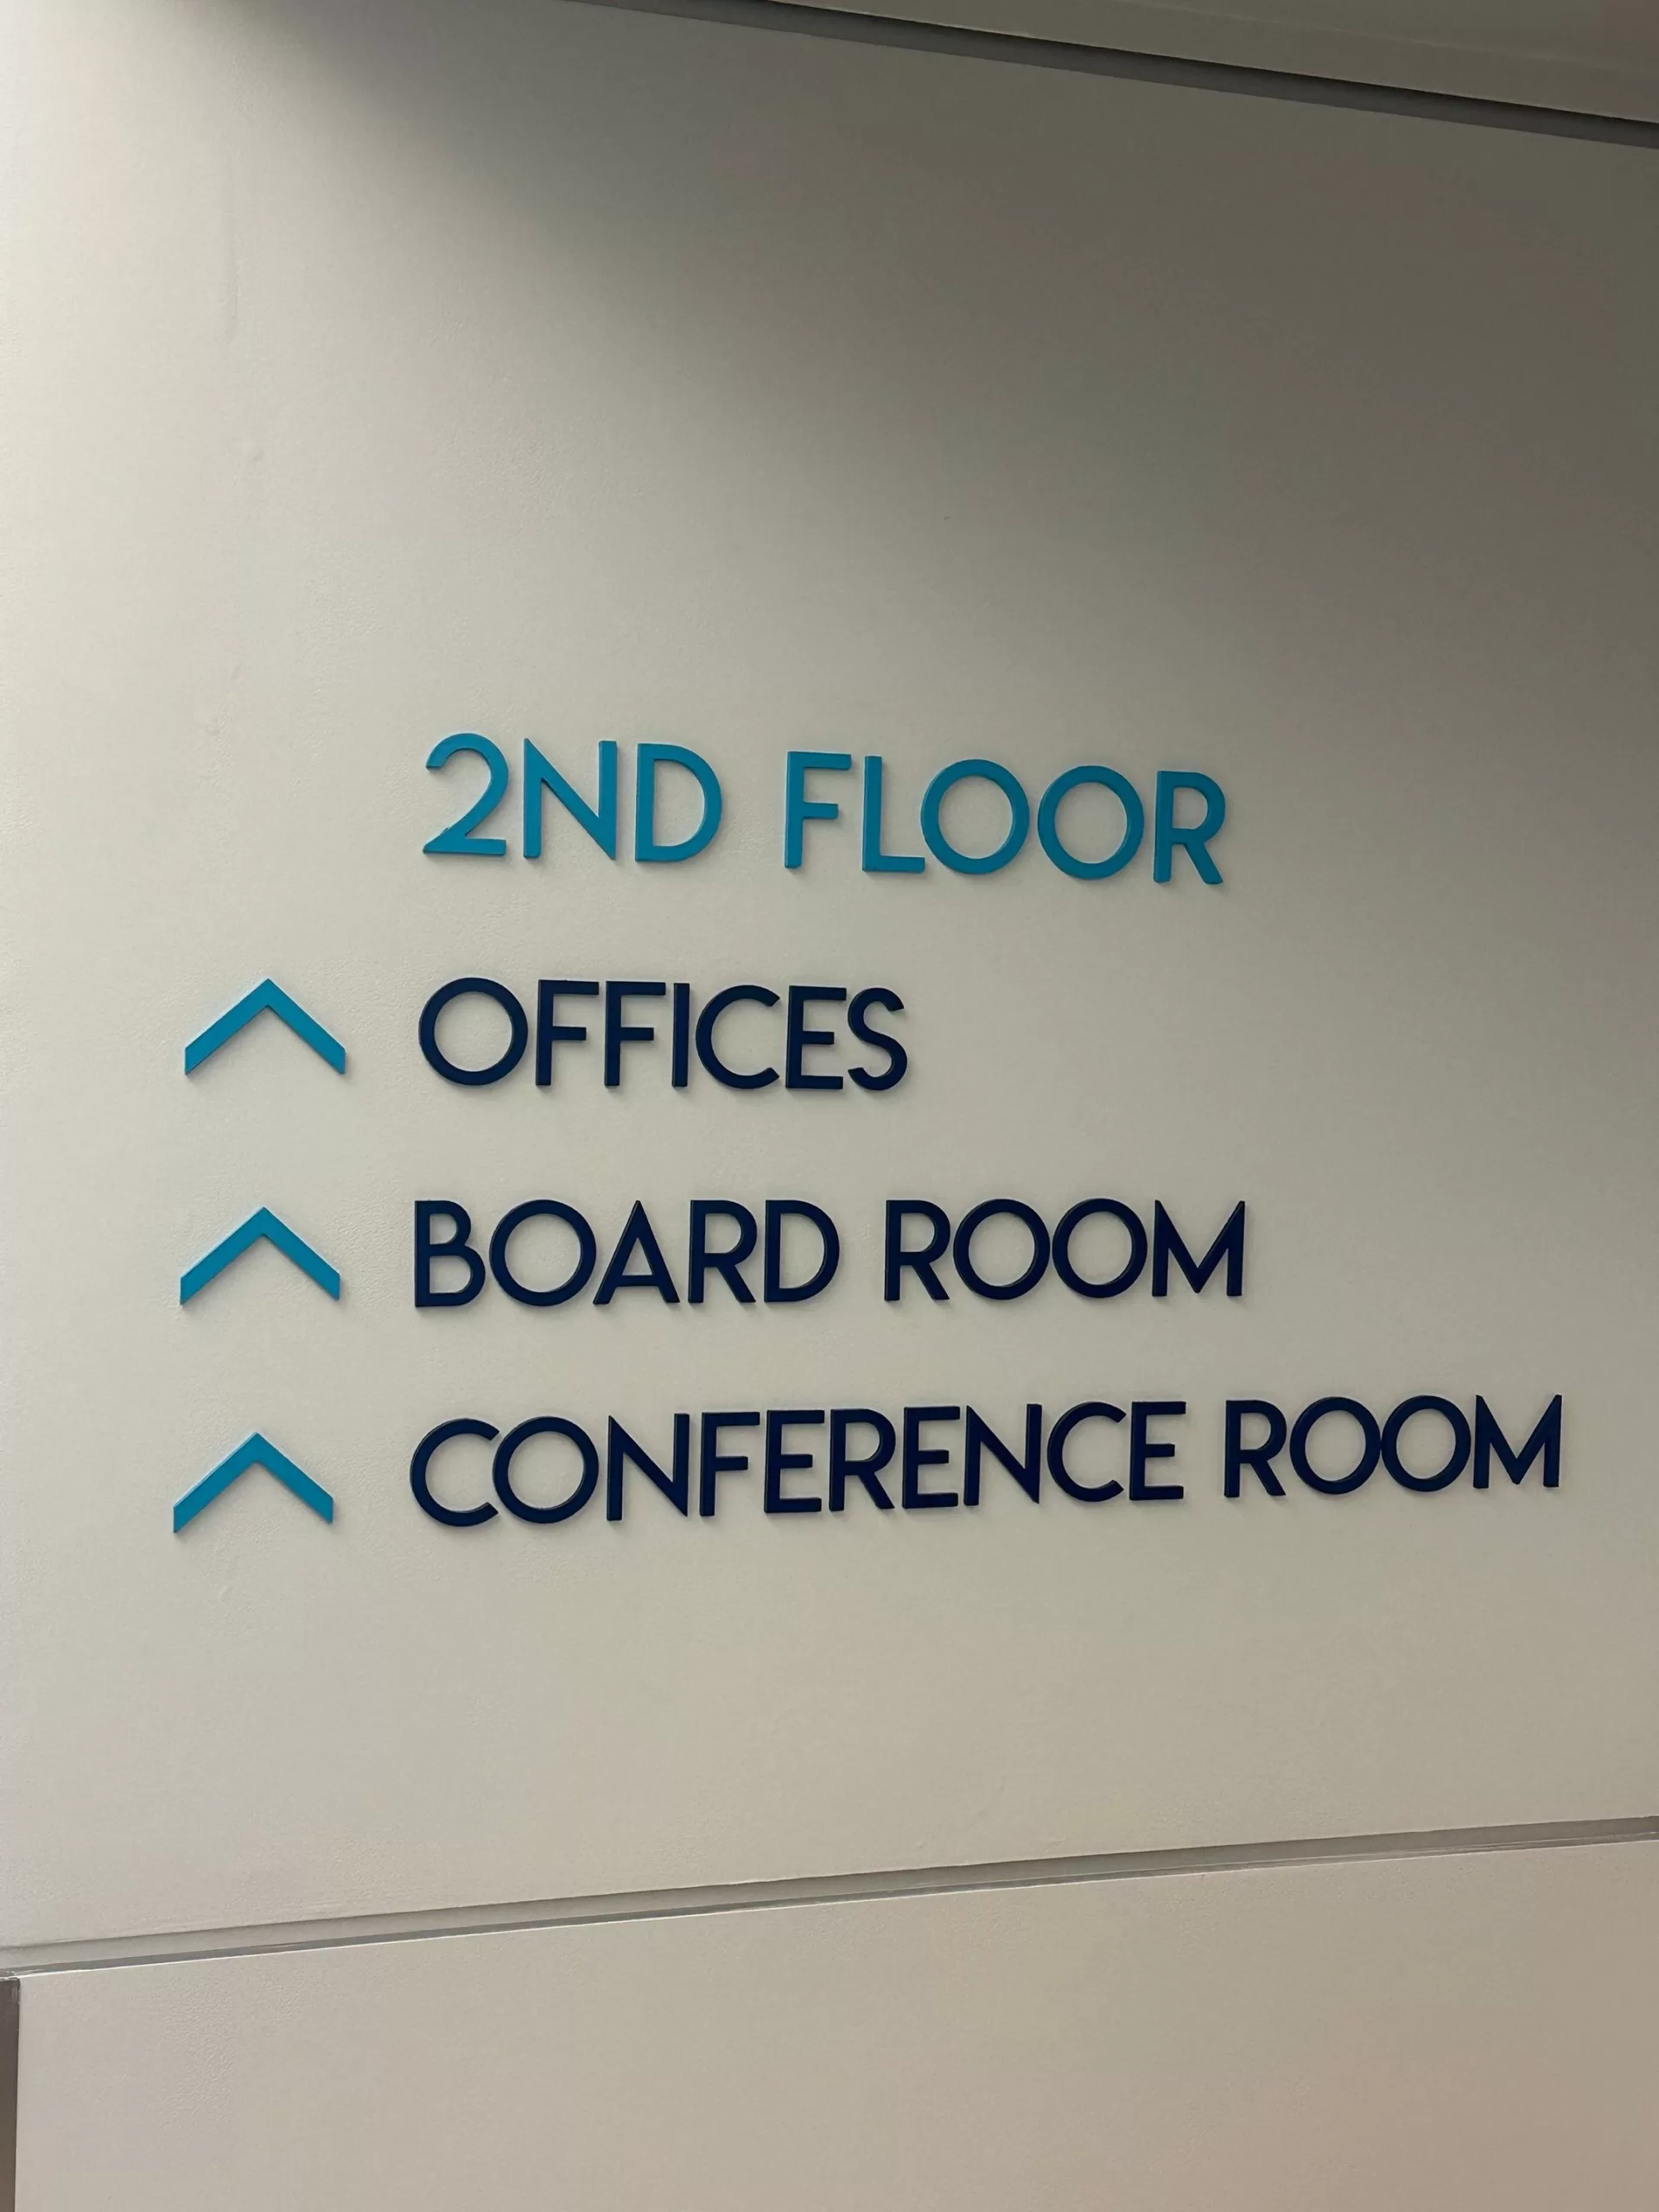 Wayfinding Dimensional Letter Signs Installed In Building By Elite Custom Signs